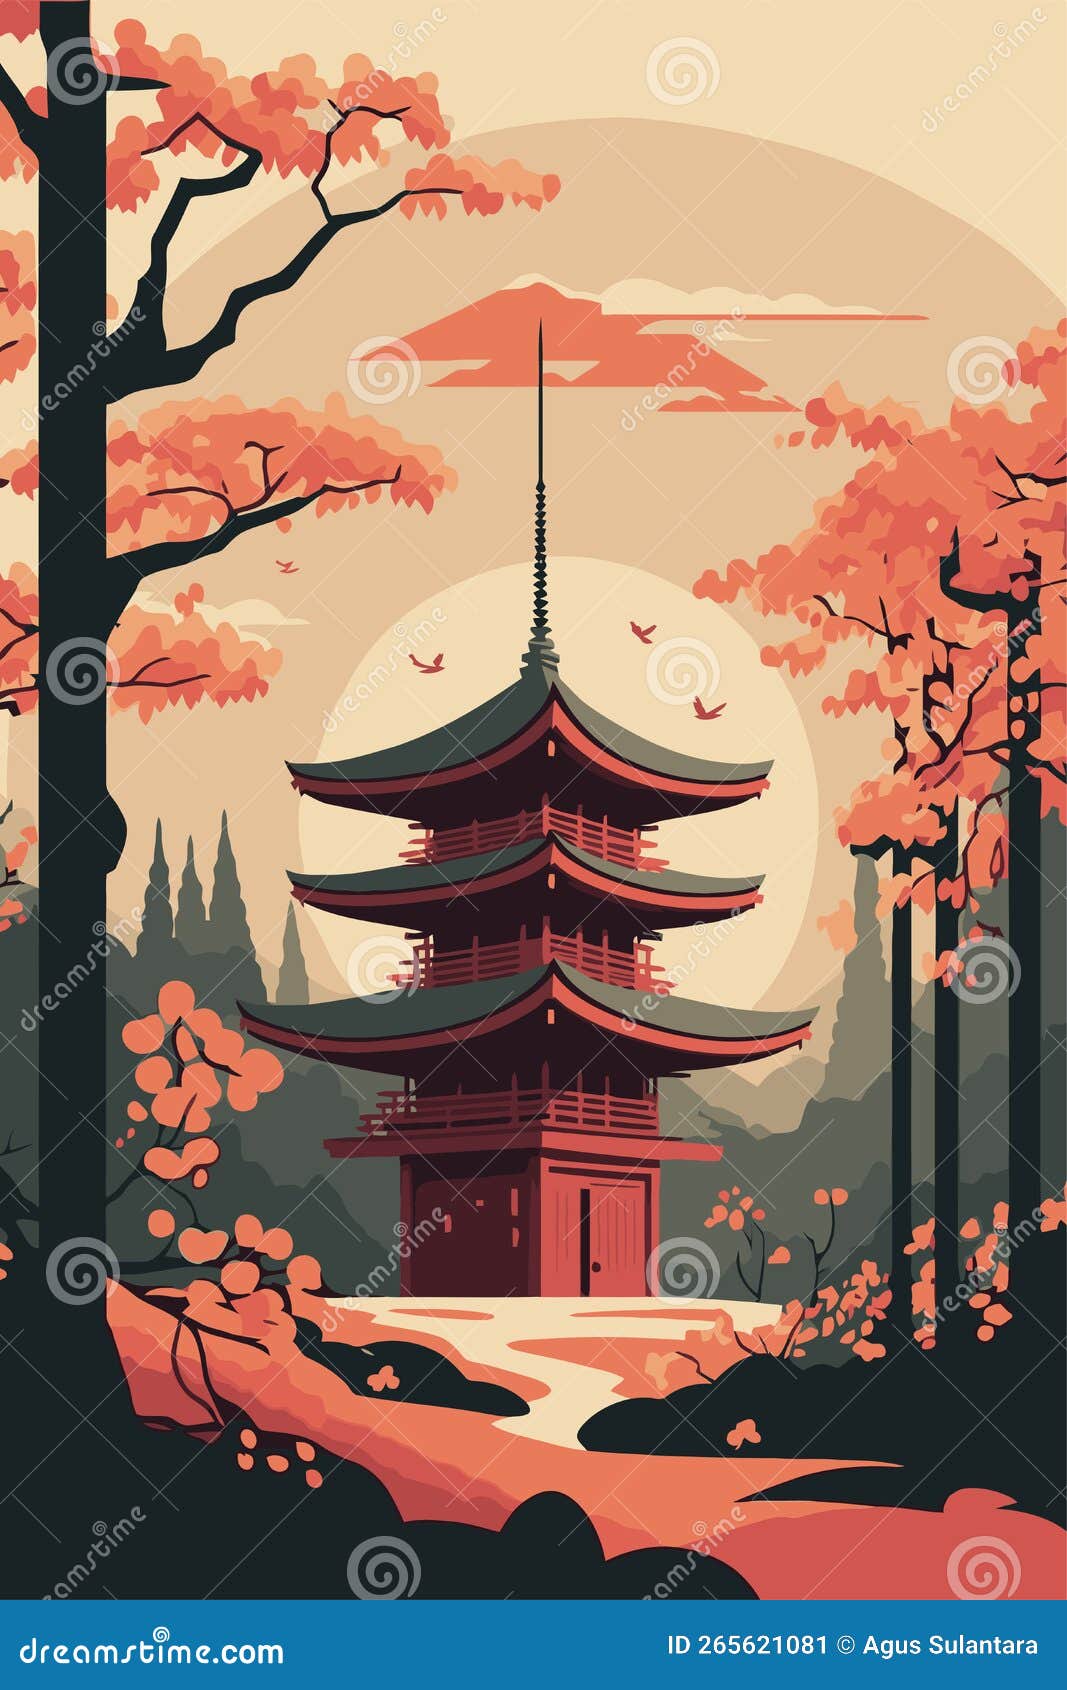 Japan Temple or Asian Pagoda, Japanese Traditional Landmark with Cherry ...